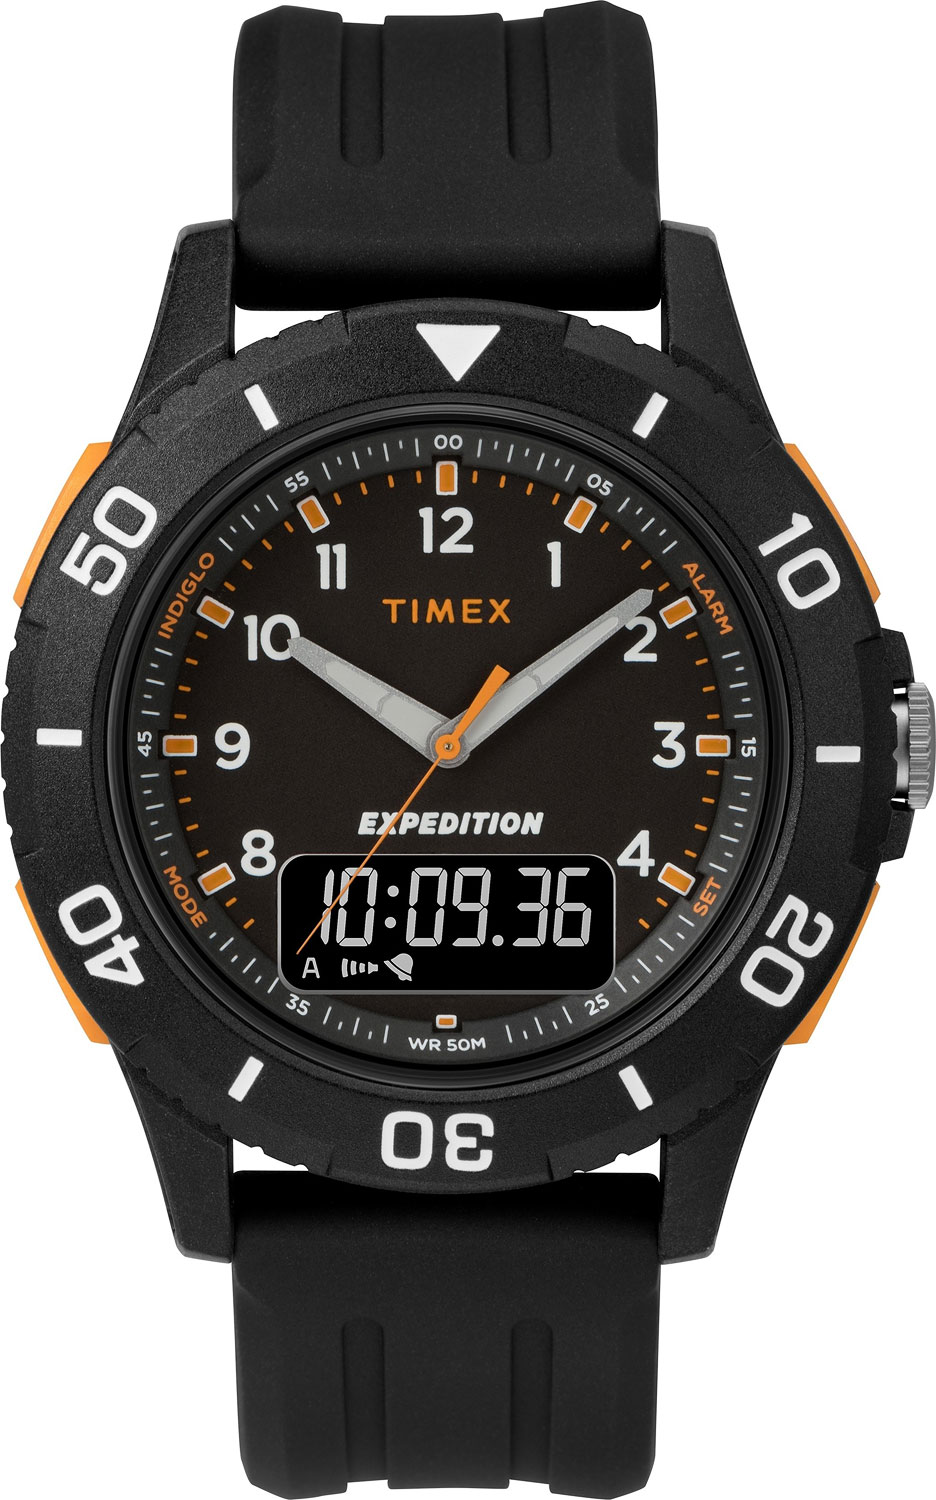   Timex Expedition TW4B16700RY  